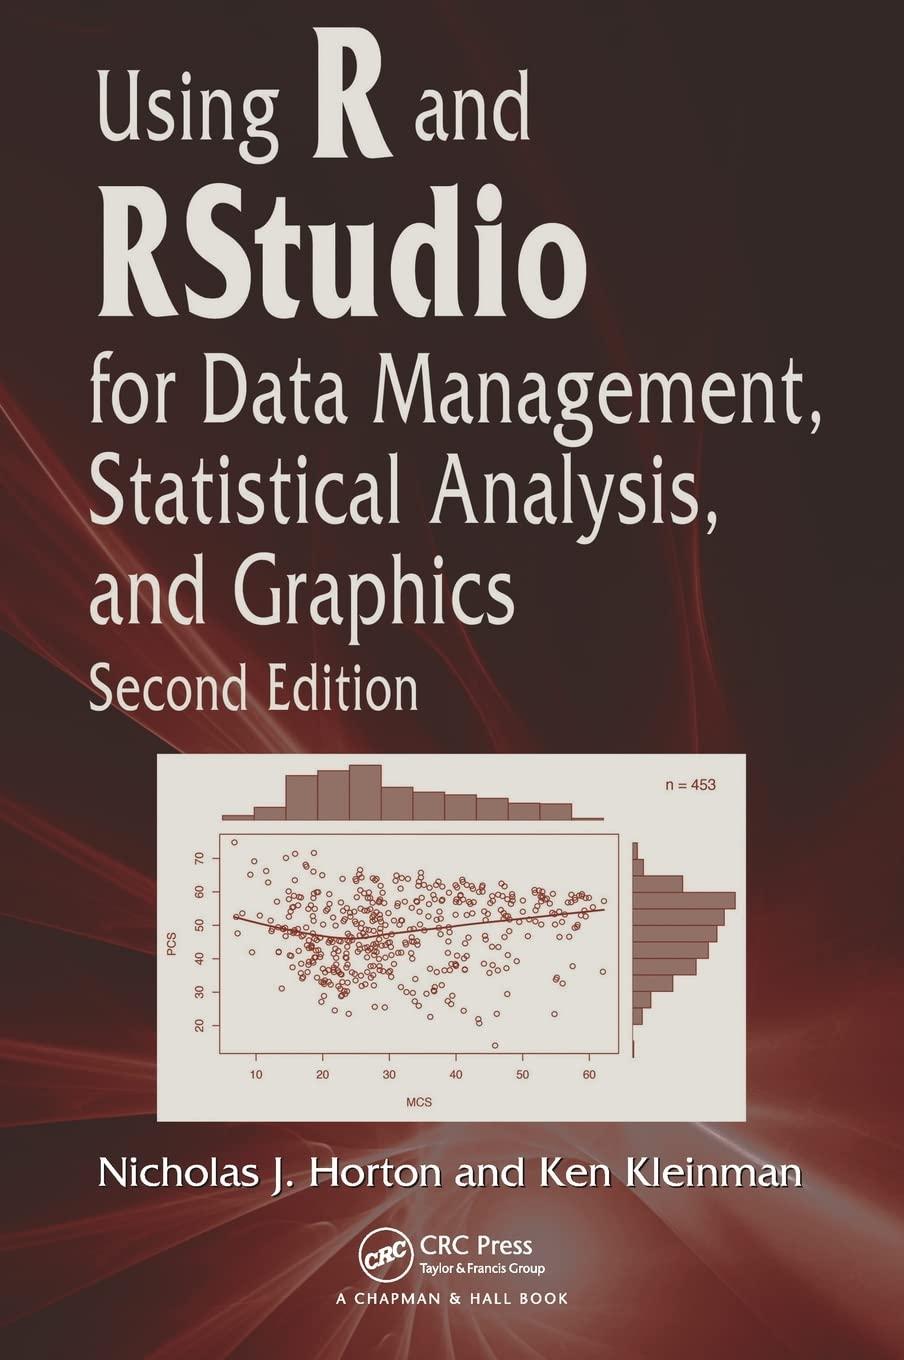 using r and rstudio for data management statistical analysis and graphics 2nd edition nicholas j. horton, ken